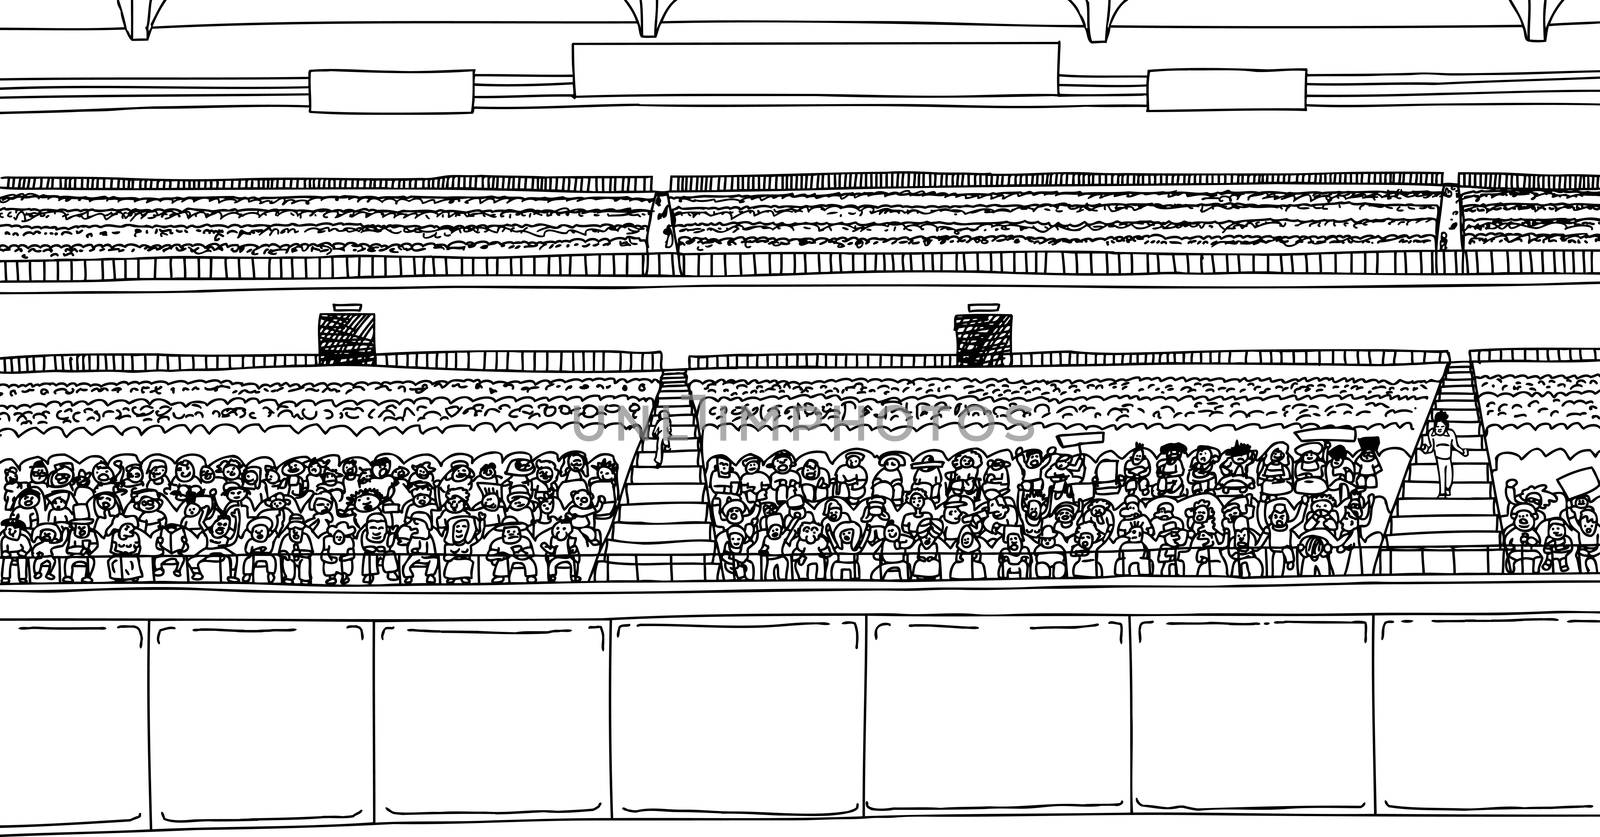 Large Stadium with Spectators as Outline by TheBlackRhino